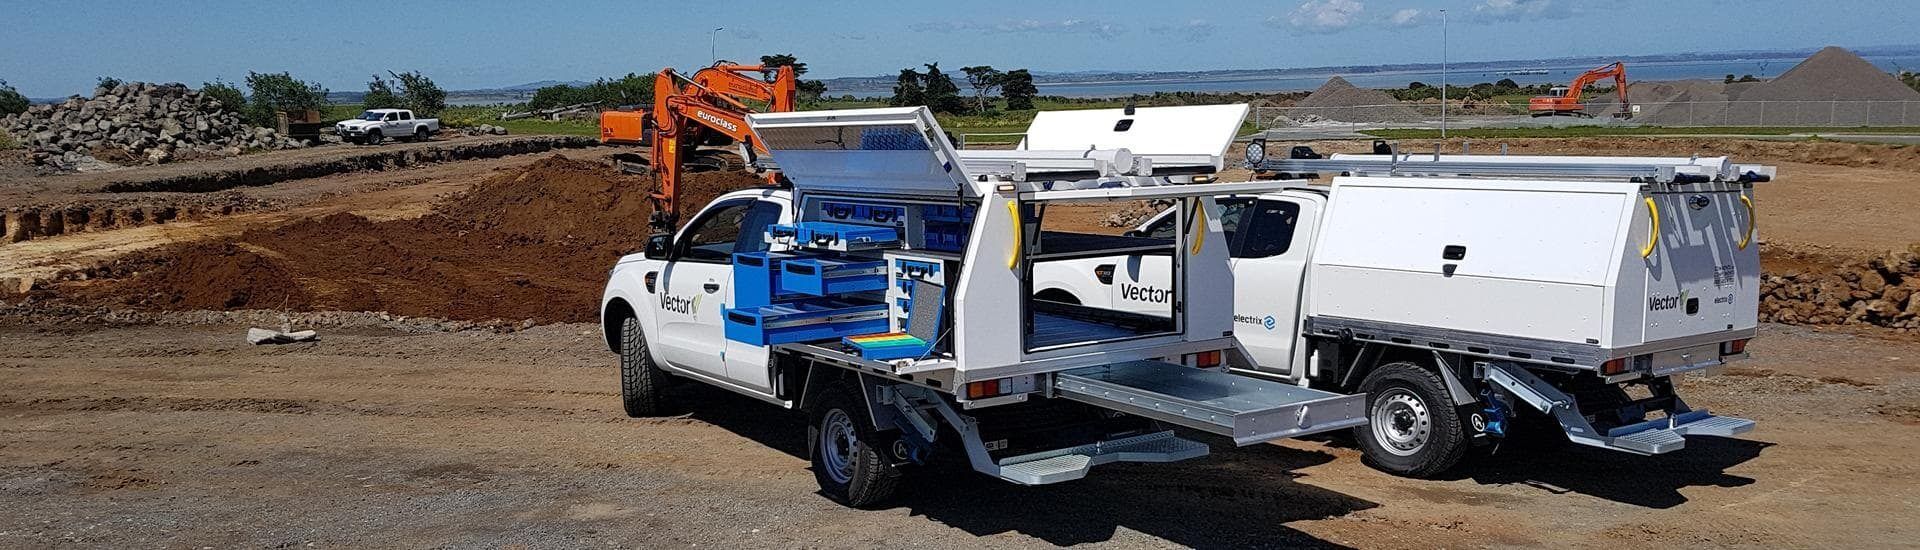 Commercial Vehicle Fitout - Ute Service Body with Tool Boxes